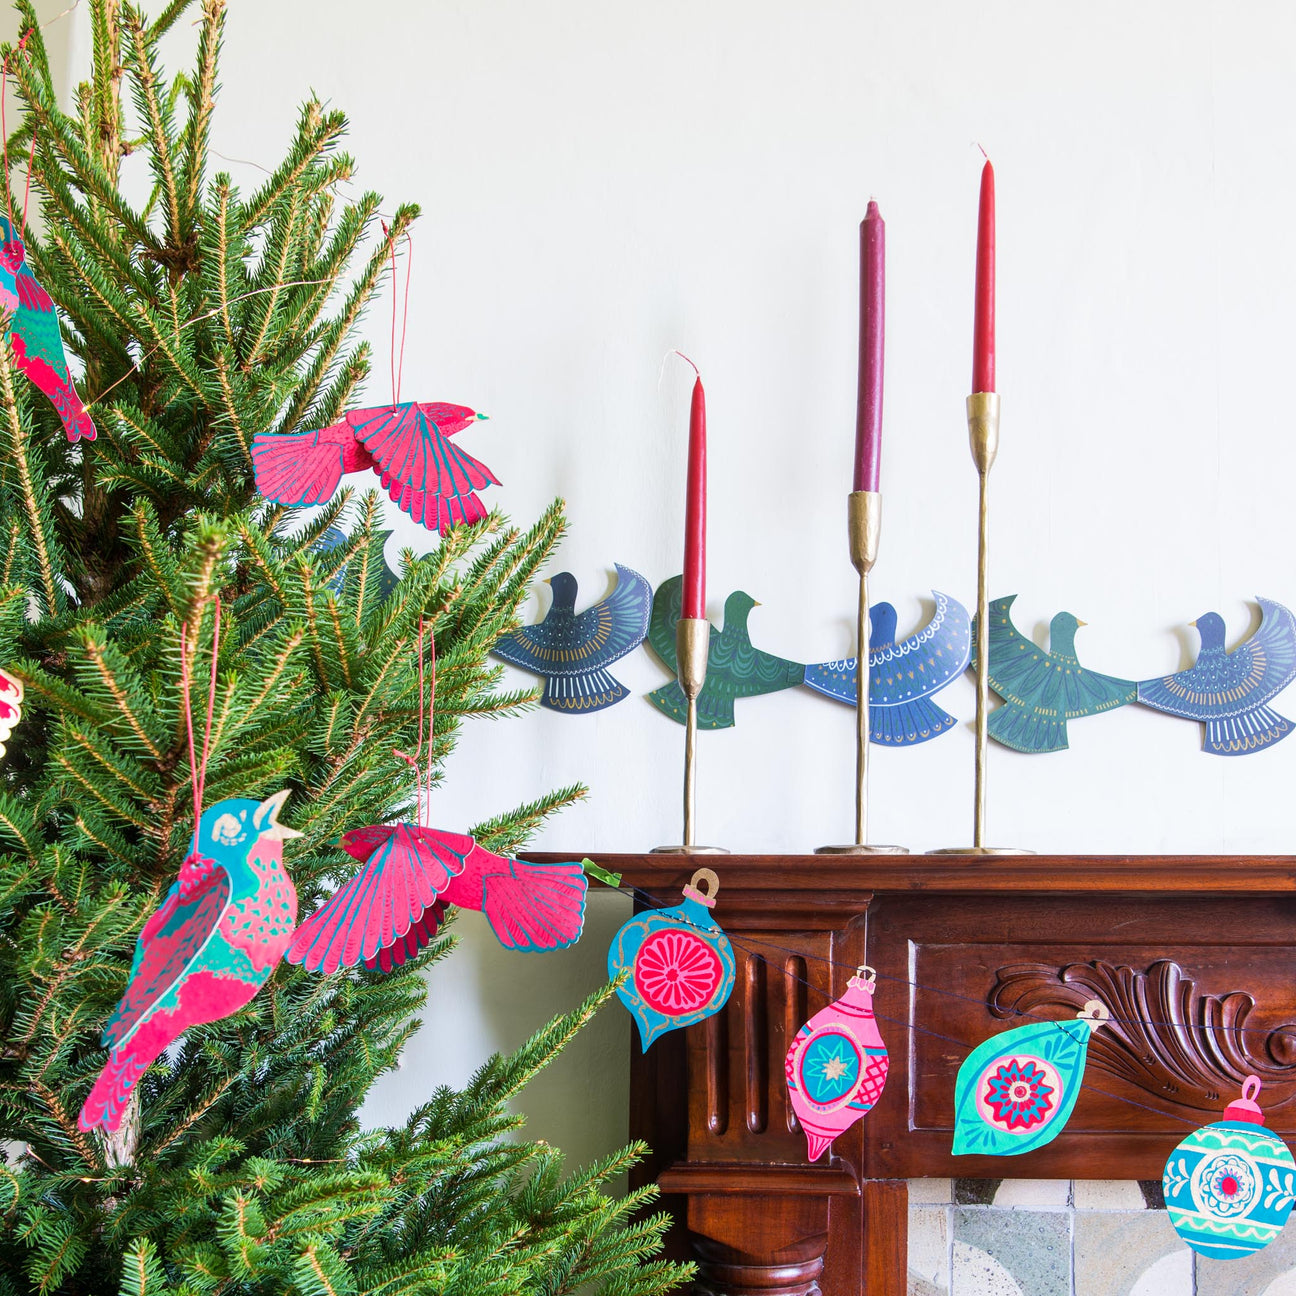 Handprinted Winter Holiday Paper Decorations - various designs